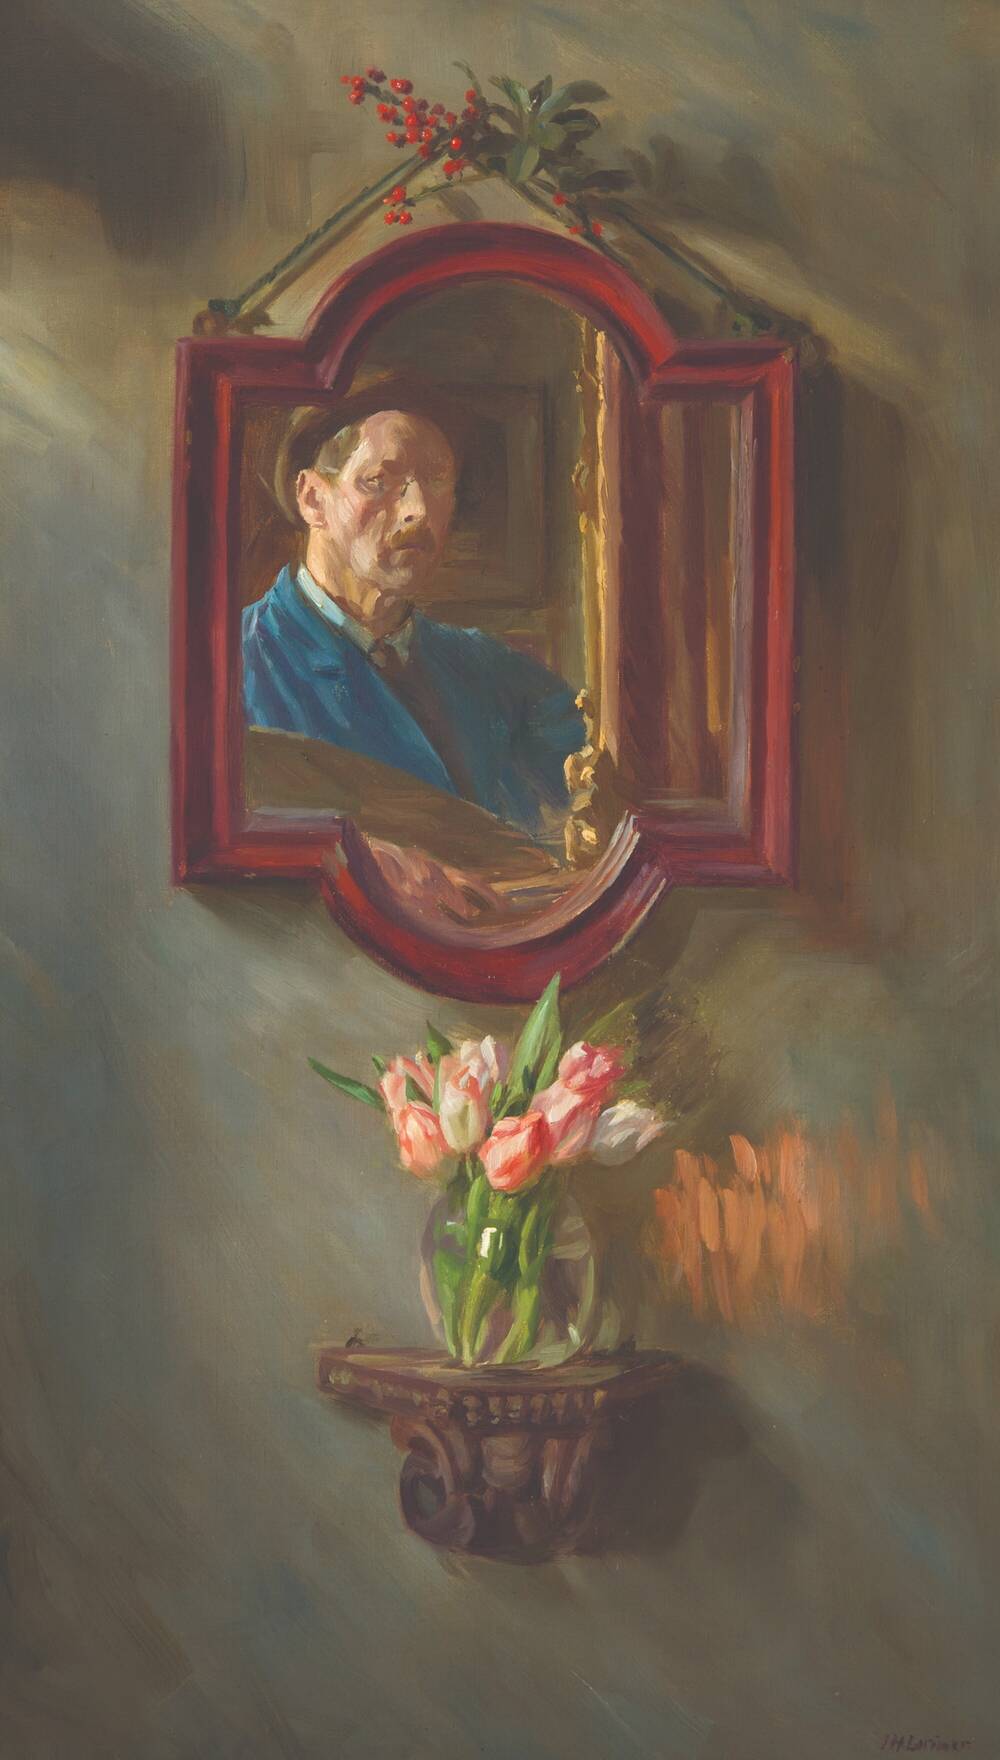 Self portrait of a man reflected in a small mirror on a wall, with a bunch of tulips on a small shelf below.